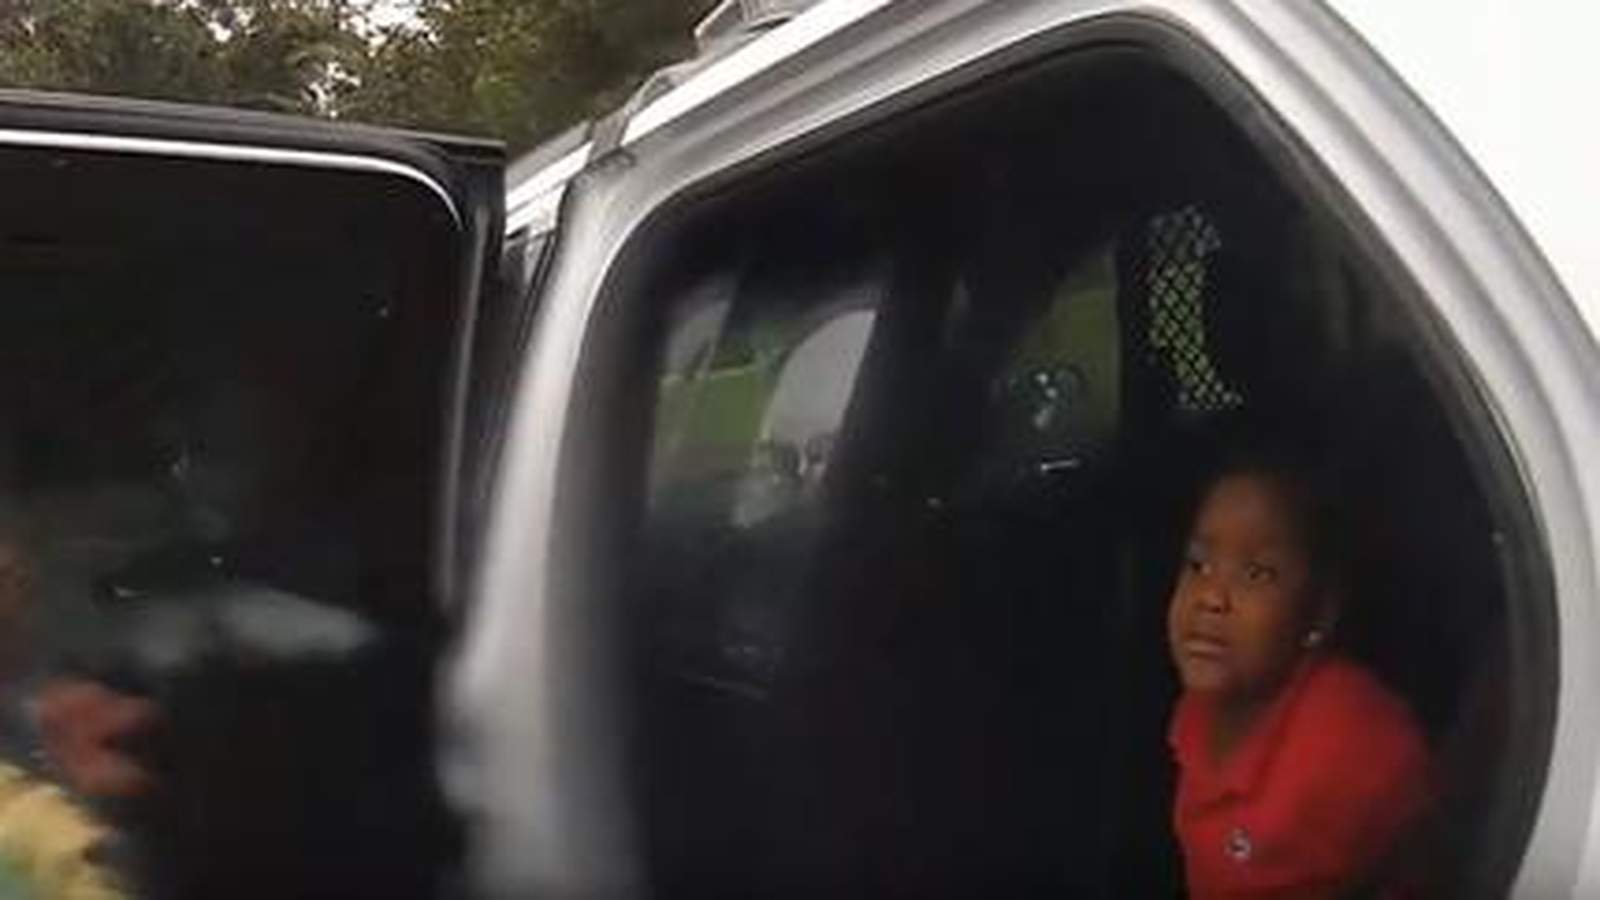 Orlando police sergeant disciplined for forgetting procedure during 6-year-old girl’s arrest